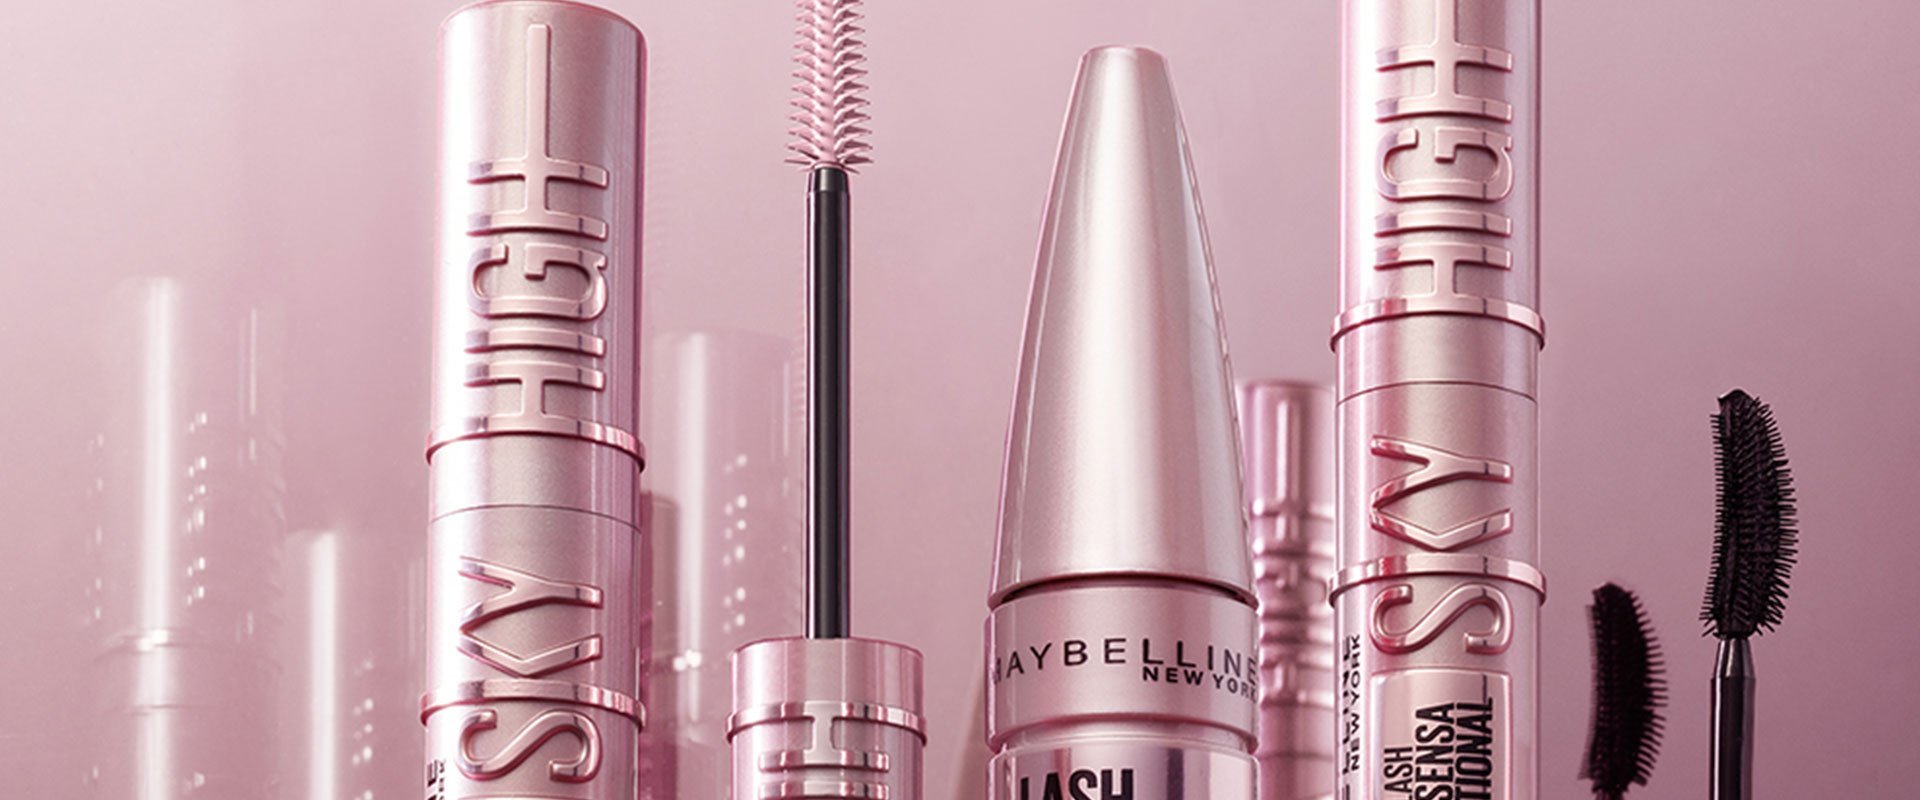 Story High Sky How The L\'Oréal Impact - Maybelline\'s NY a Mascara of Groupe: Launch Beauty Product to